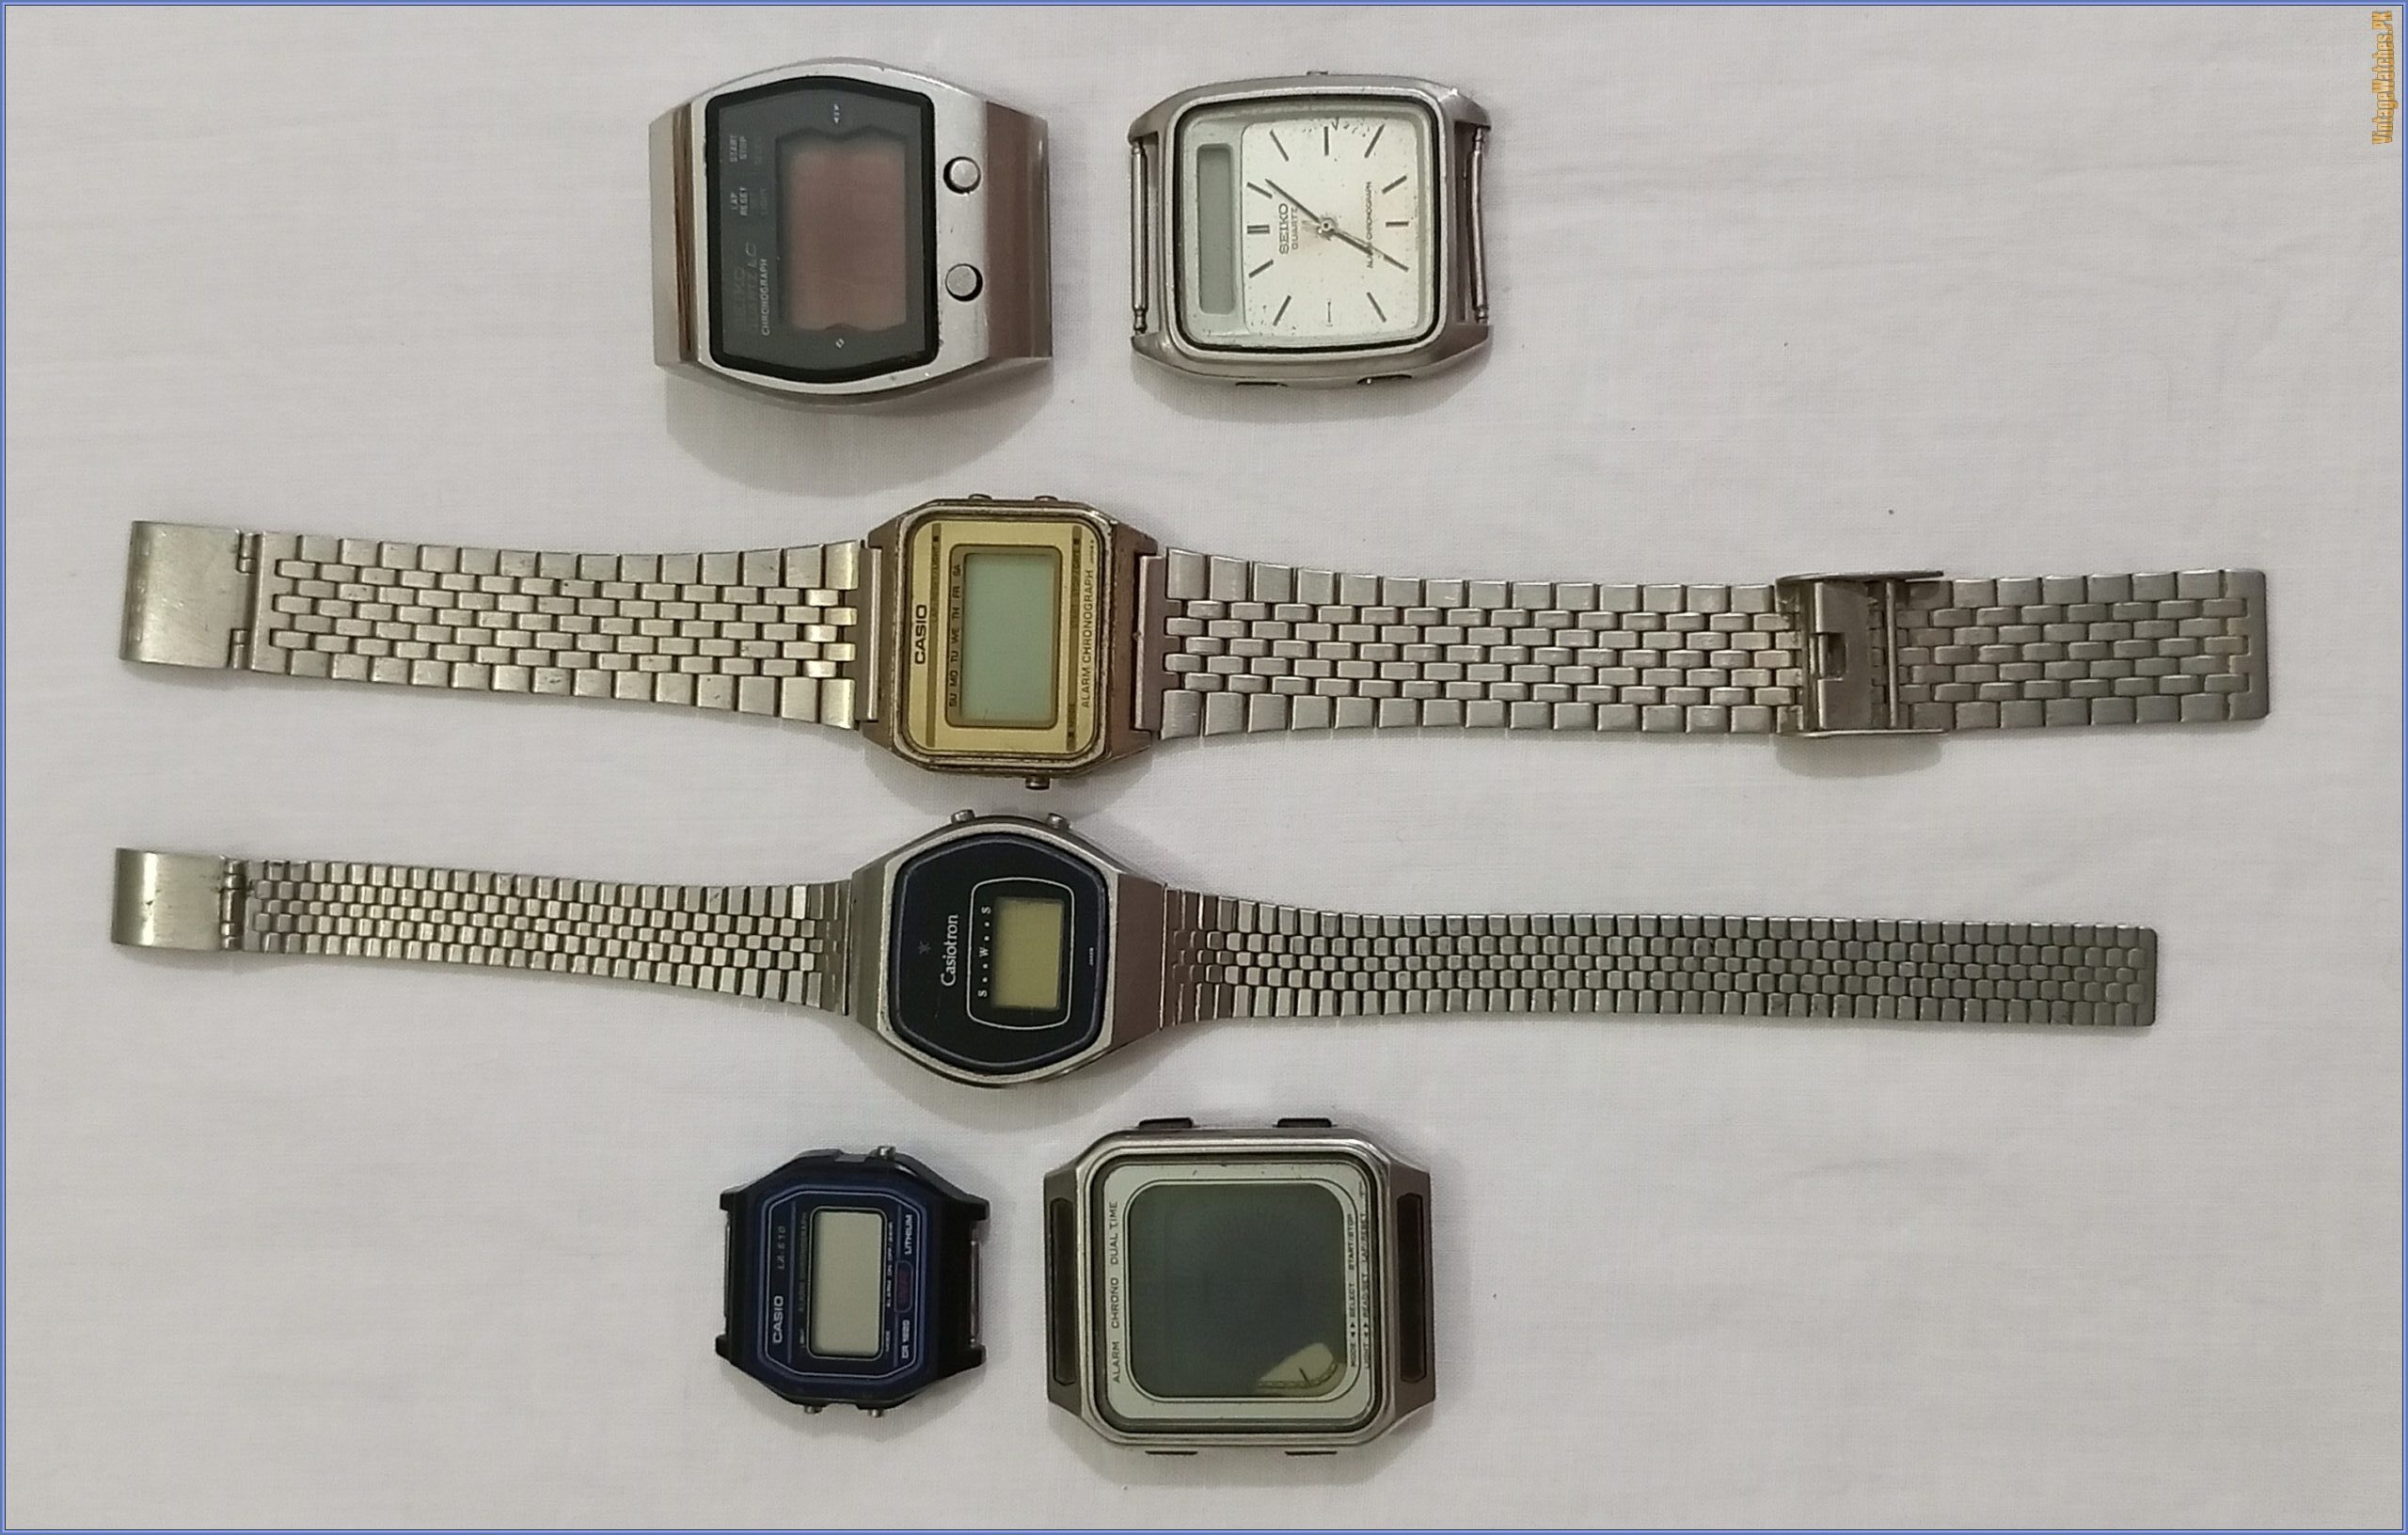 Lot 6 Branded Antique Vintage Rare OLD Digital Watch Casio Seiko Citizen Japan - PK00010-IMG_20221009_191905_366-scaled-e1680173472878 - VintageWatches.PK